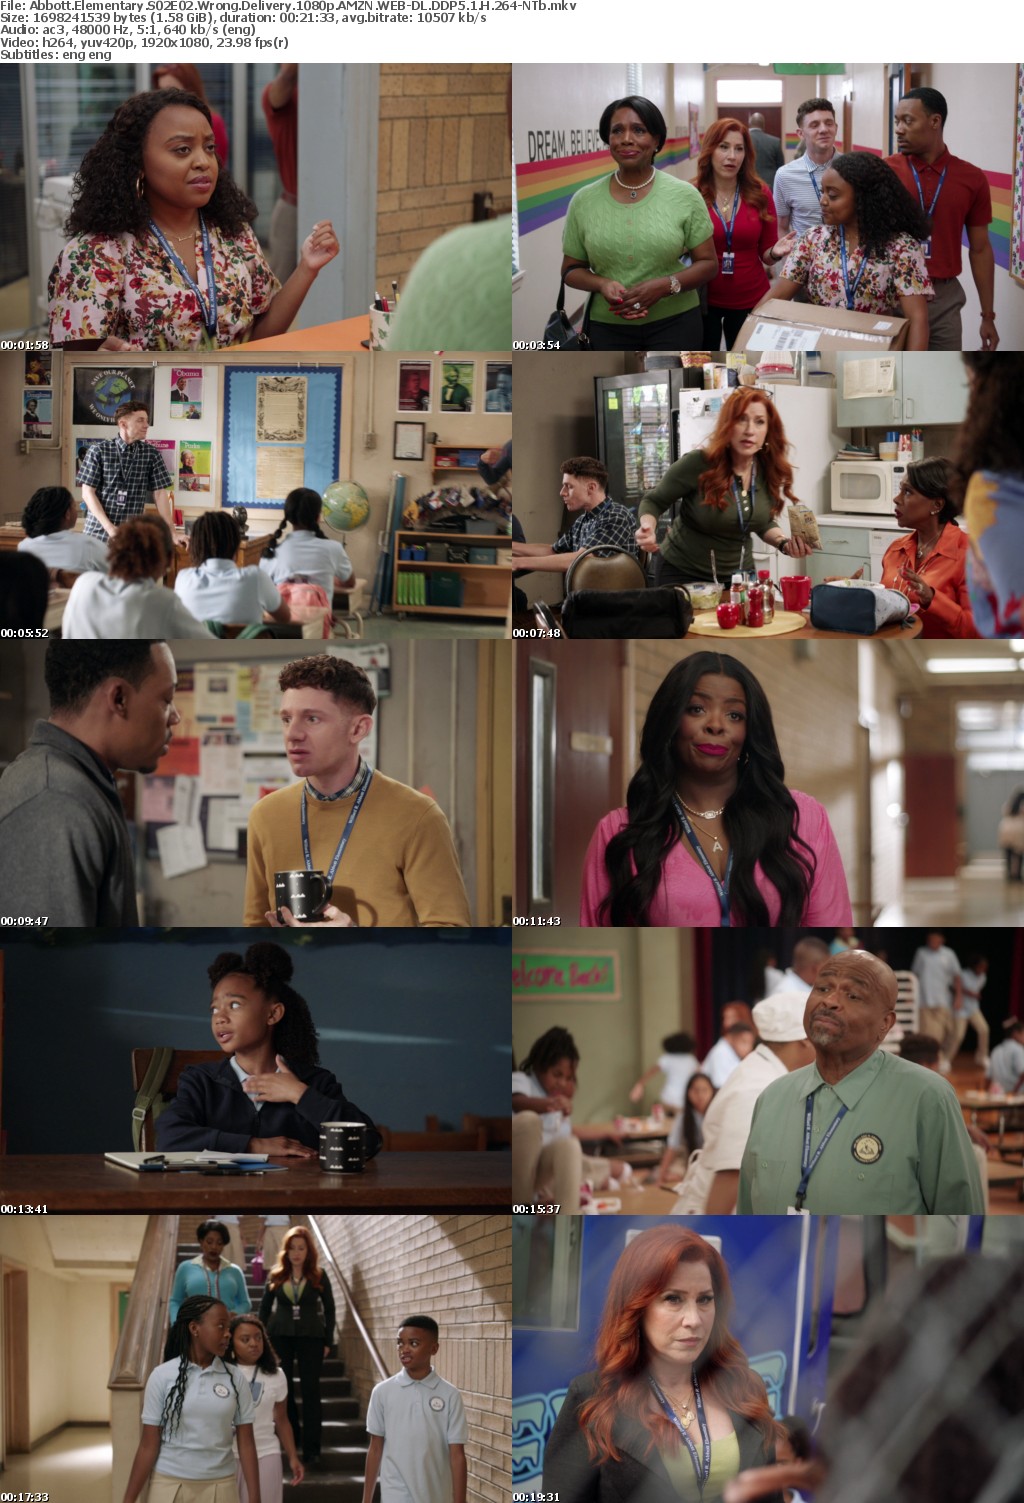 Abbott Elementary S02E02 Wrong Delivery 1080p AMZN WEBRip DDP5 1 x264-NTb